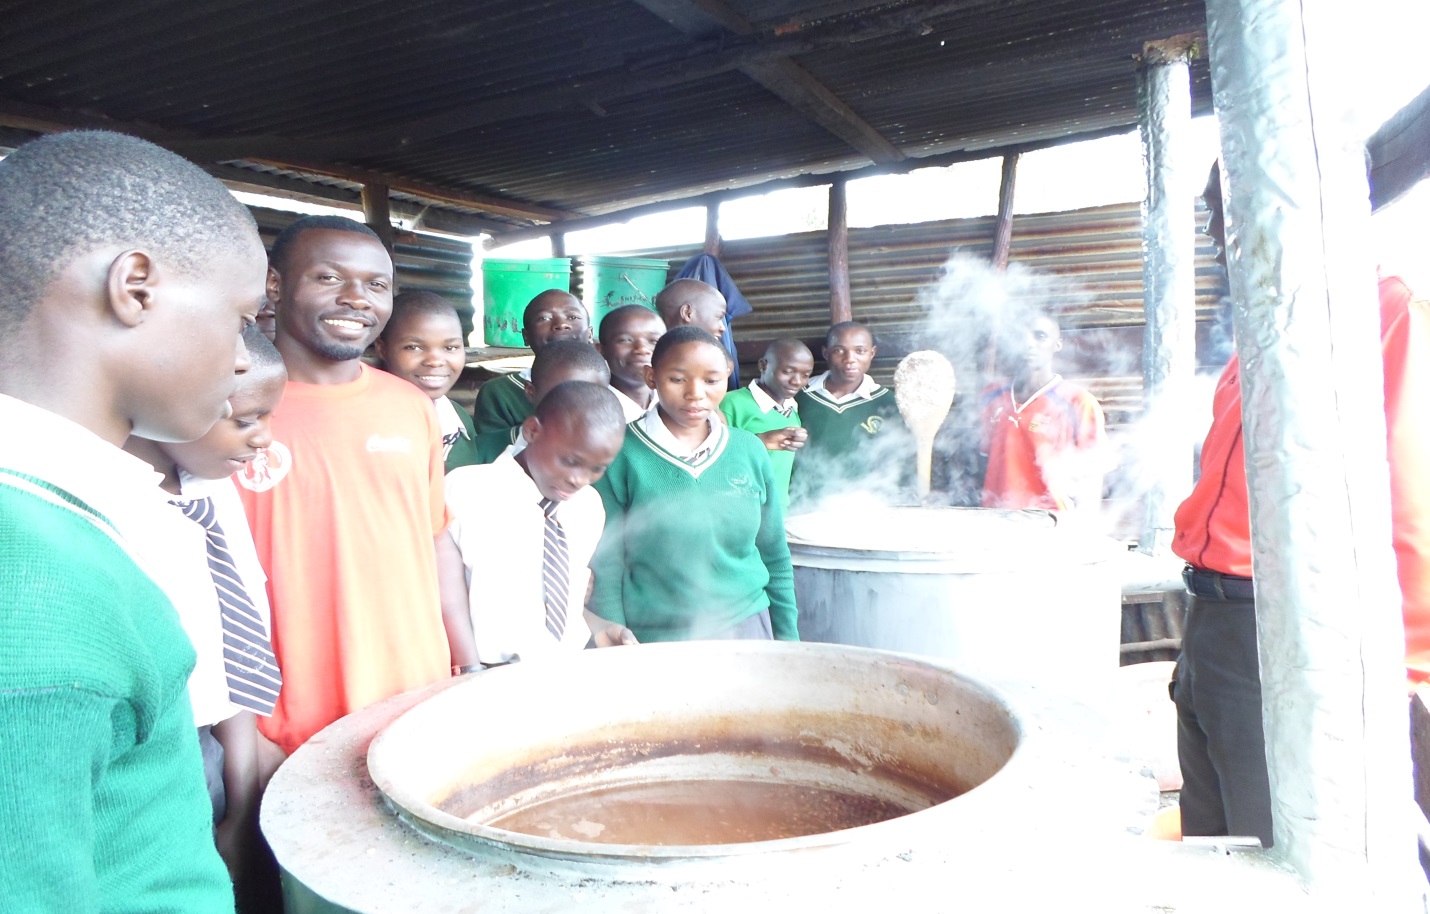 Teachers and Students being happy at the sight of Large Clean Cooking Stoves